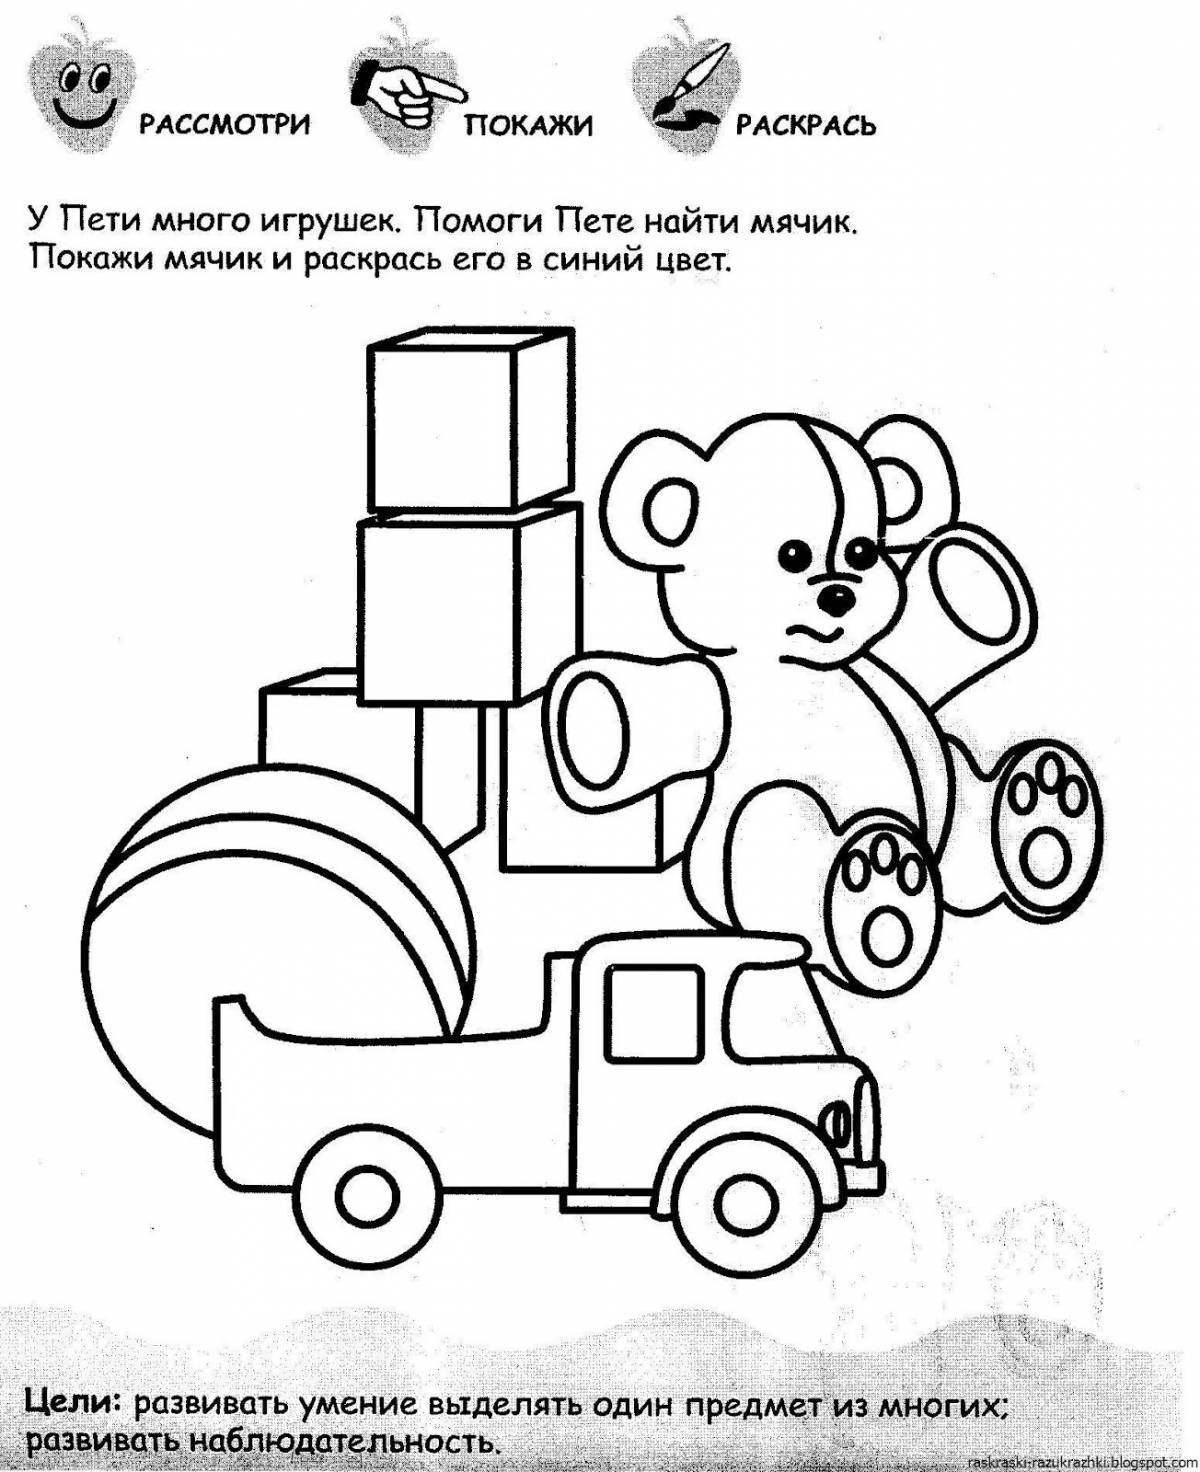 Crazy coloring pages for 3-4 year old boys